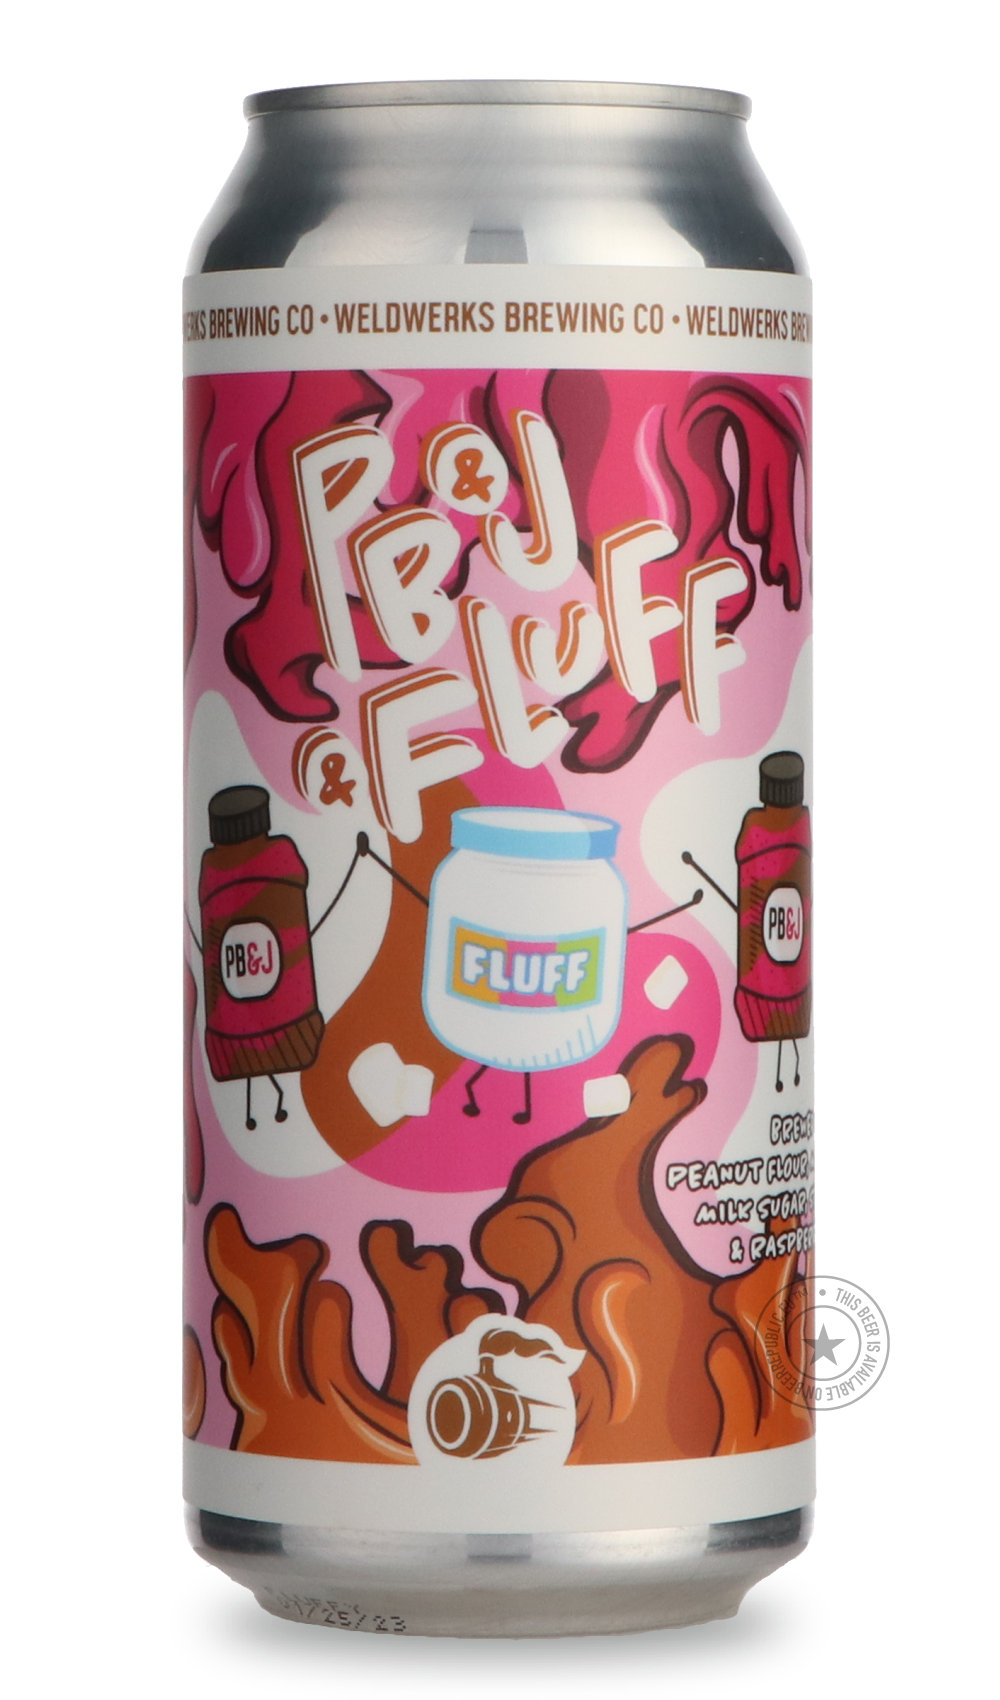 -WeldWerks- PB&J Fluff-Sour / Wild & Fruity- Only @ Beer Republic - The best online beer store for American & Canadian craft beer - Buy beer online from the USA and Canada - Bier online kopen - Amerikaans bier kopen - Craft beer store - Craft beer kopen - Amerikanisch bier kaufen - Bier online kaufen - Acheter biere online - IPA - Stout - Porter - New England IPA - Hazy IPA - Imperial Stout - Barrel Aged - Barrel Aged Imperial Stout - Brown - Dark beer - Blond - Blonde - Pilsner - Lager - Wheat - Weizen - A